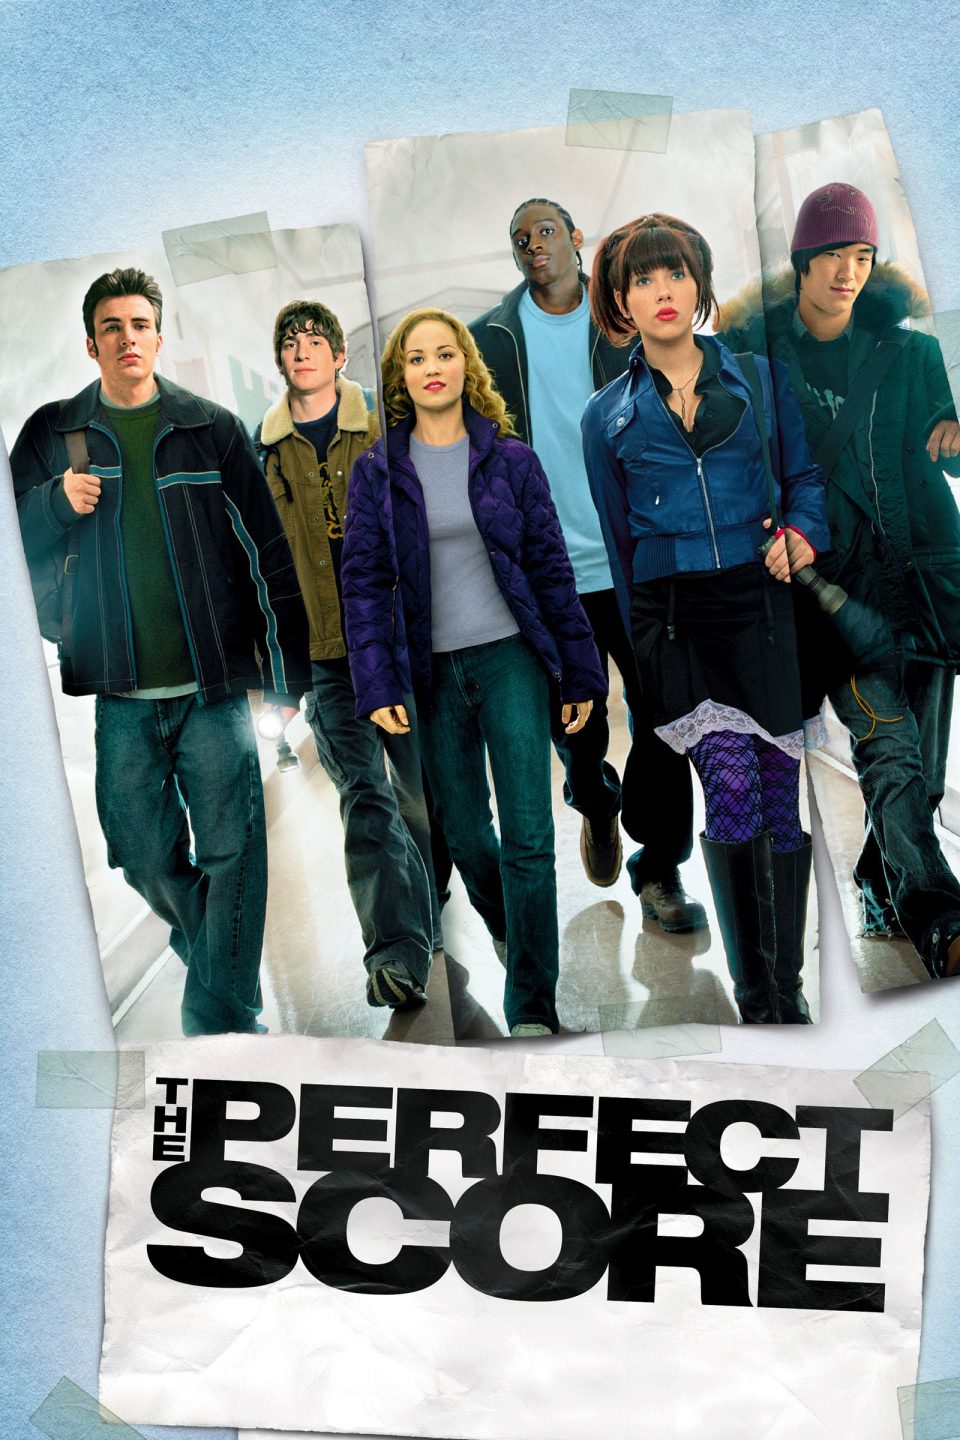 Poster for the movie "The Perfect Score"